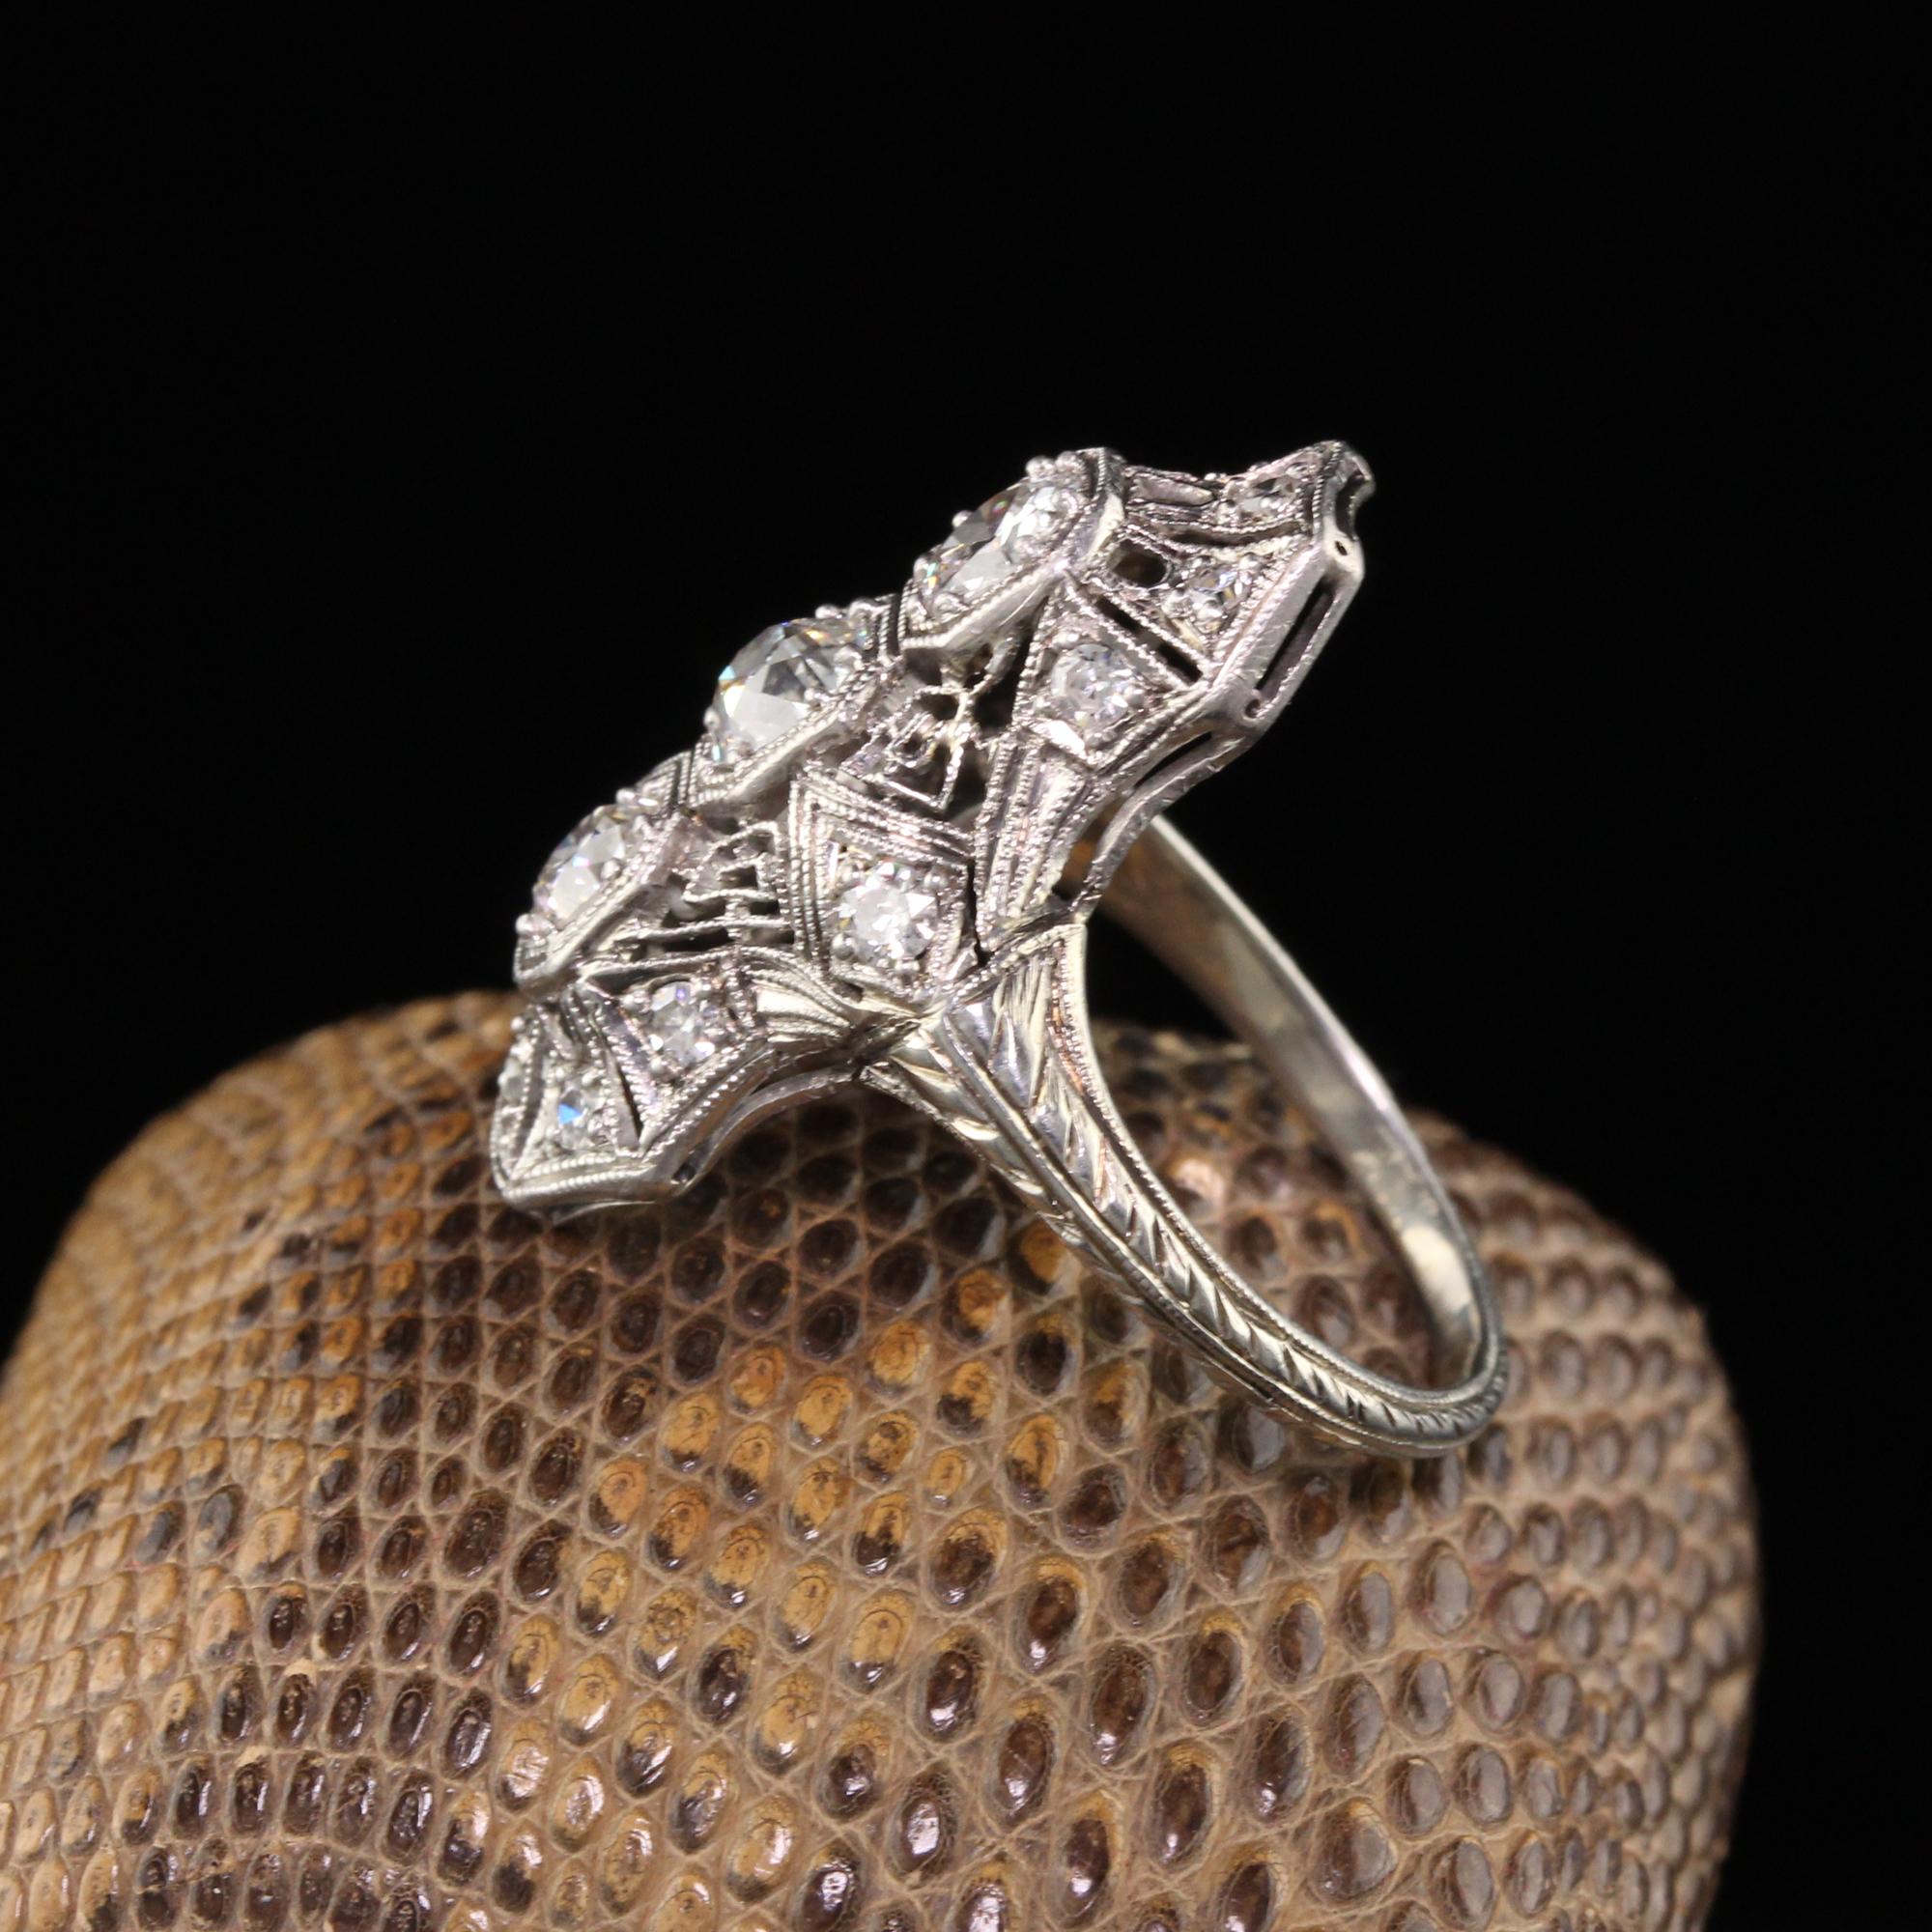 Beautiful Antique Art Deco Platinum Old European Diamond Shield Ring. This pristine Art Deco shield ring has over 1 ct of diamonds on it with incredible filigree work. The engravings are untouched and the ring hasn't been sized.

Item #R0901

Metal: